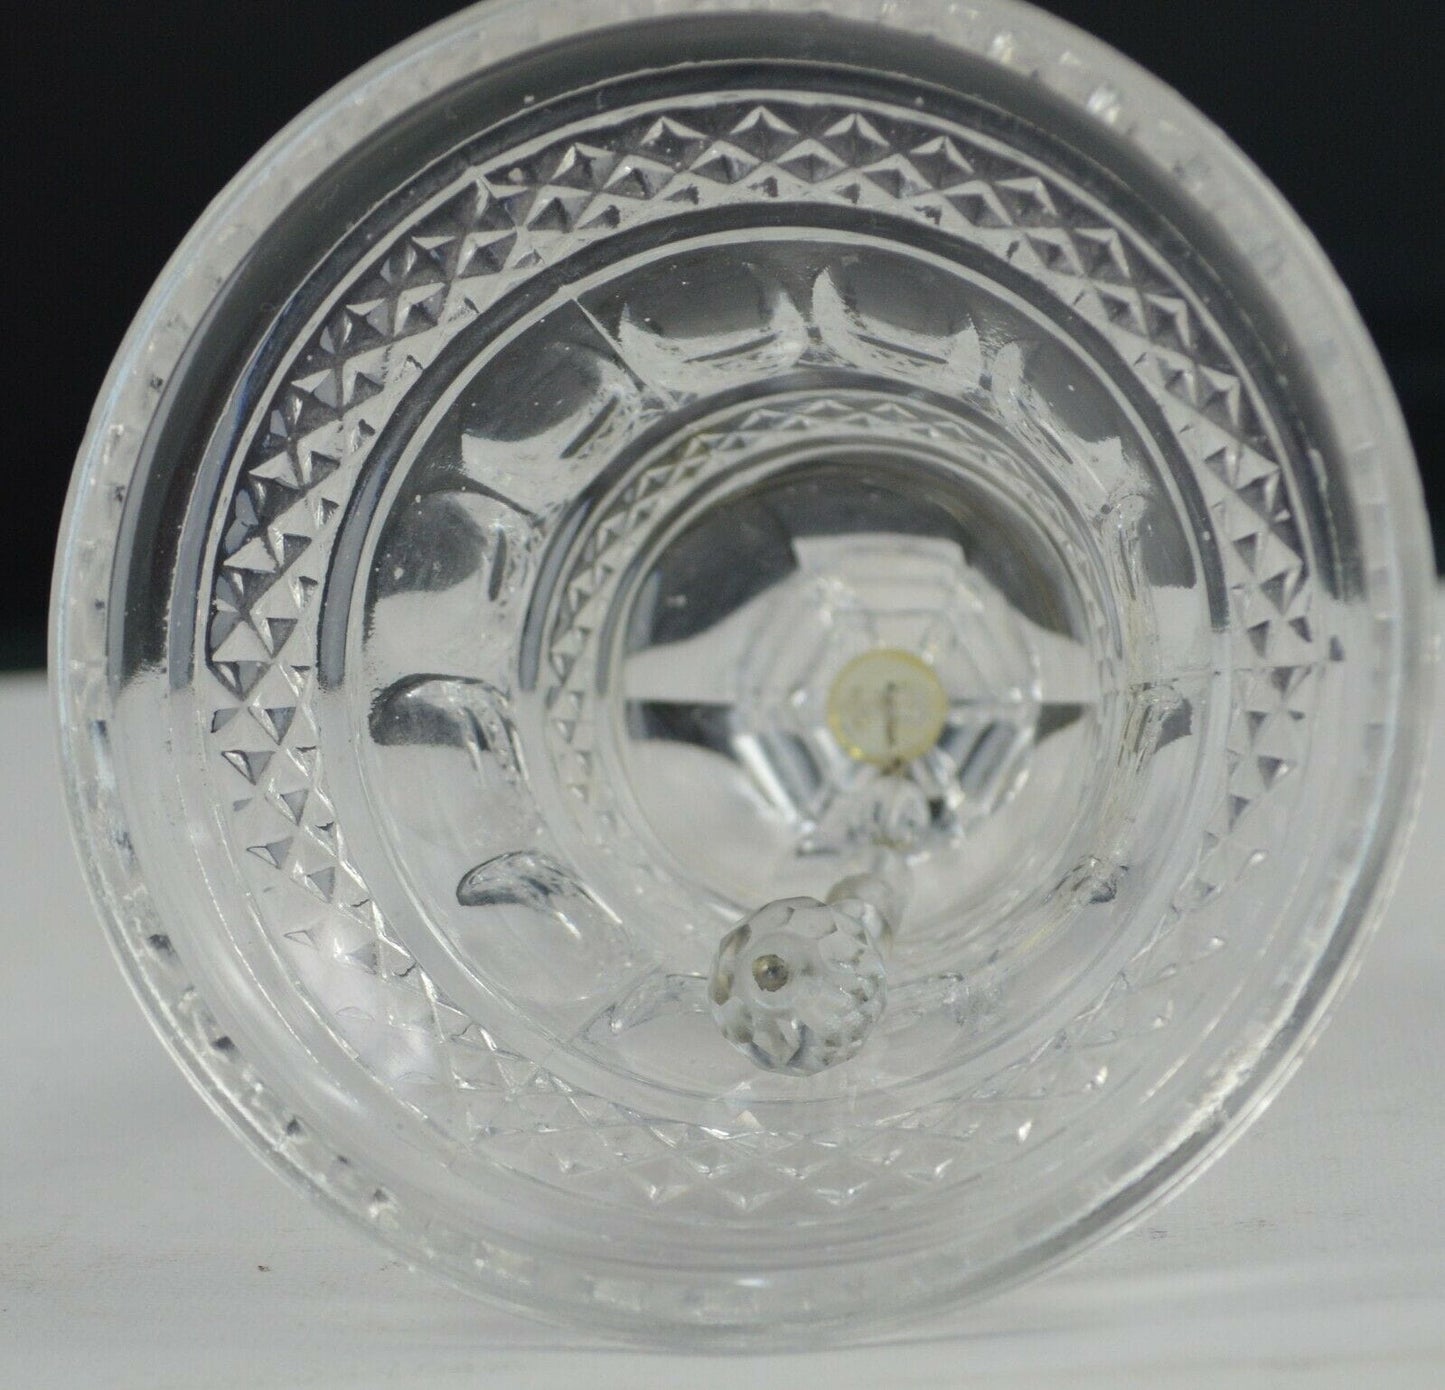 DECORATIVE CUT GLASS BELL(PREVIOUSLY OWNED) GOOD CONDITION - TMD167207